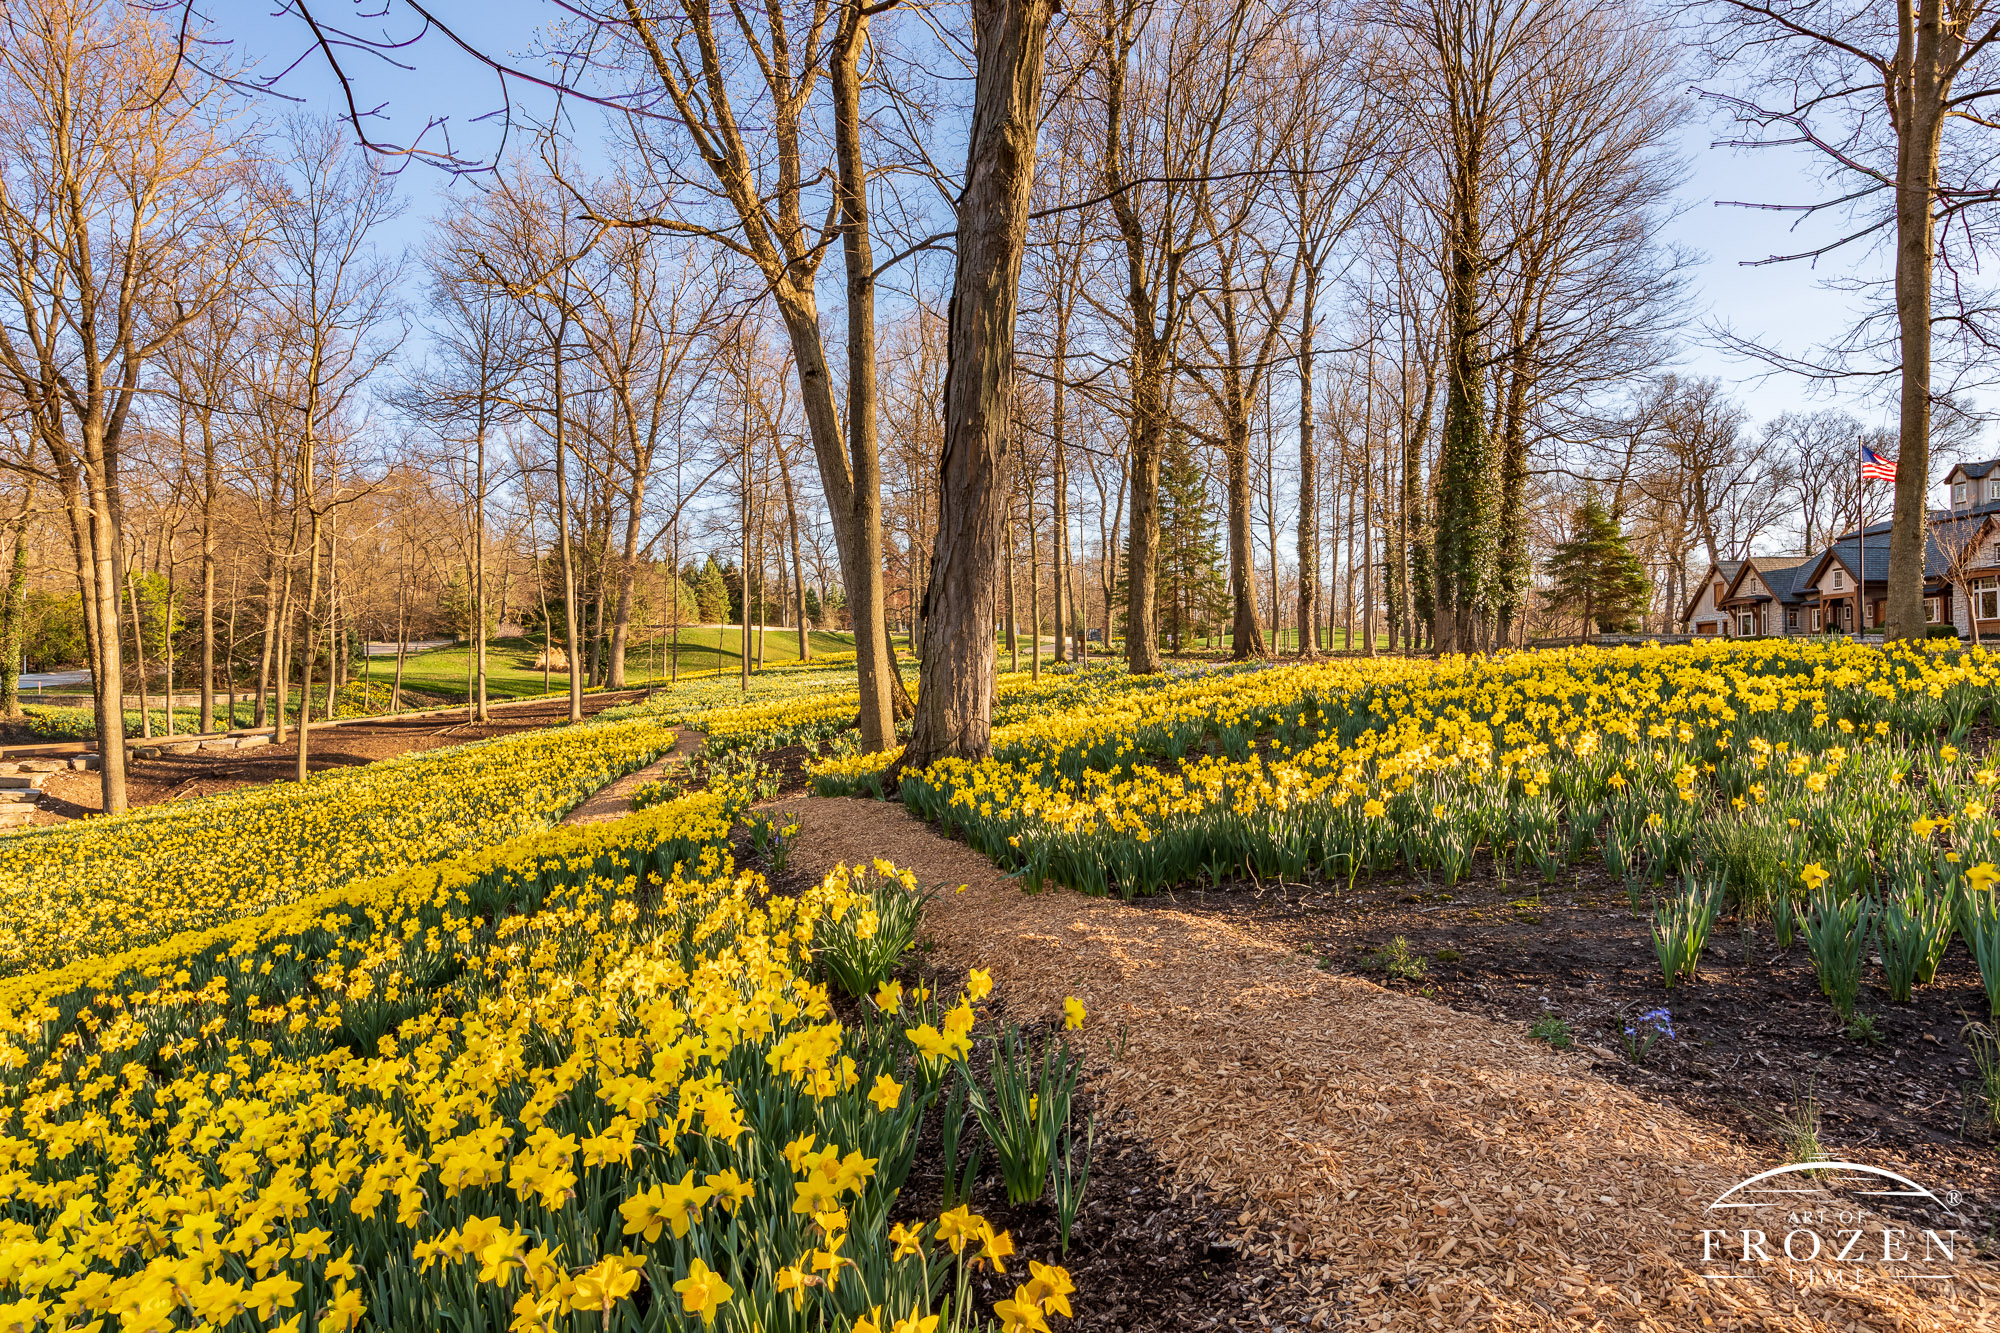 Panoramic view of a Dayton home with 160,000 daffodils in front of their property.